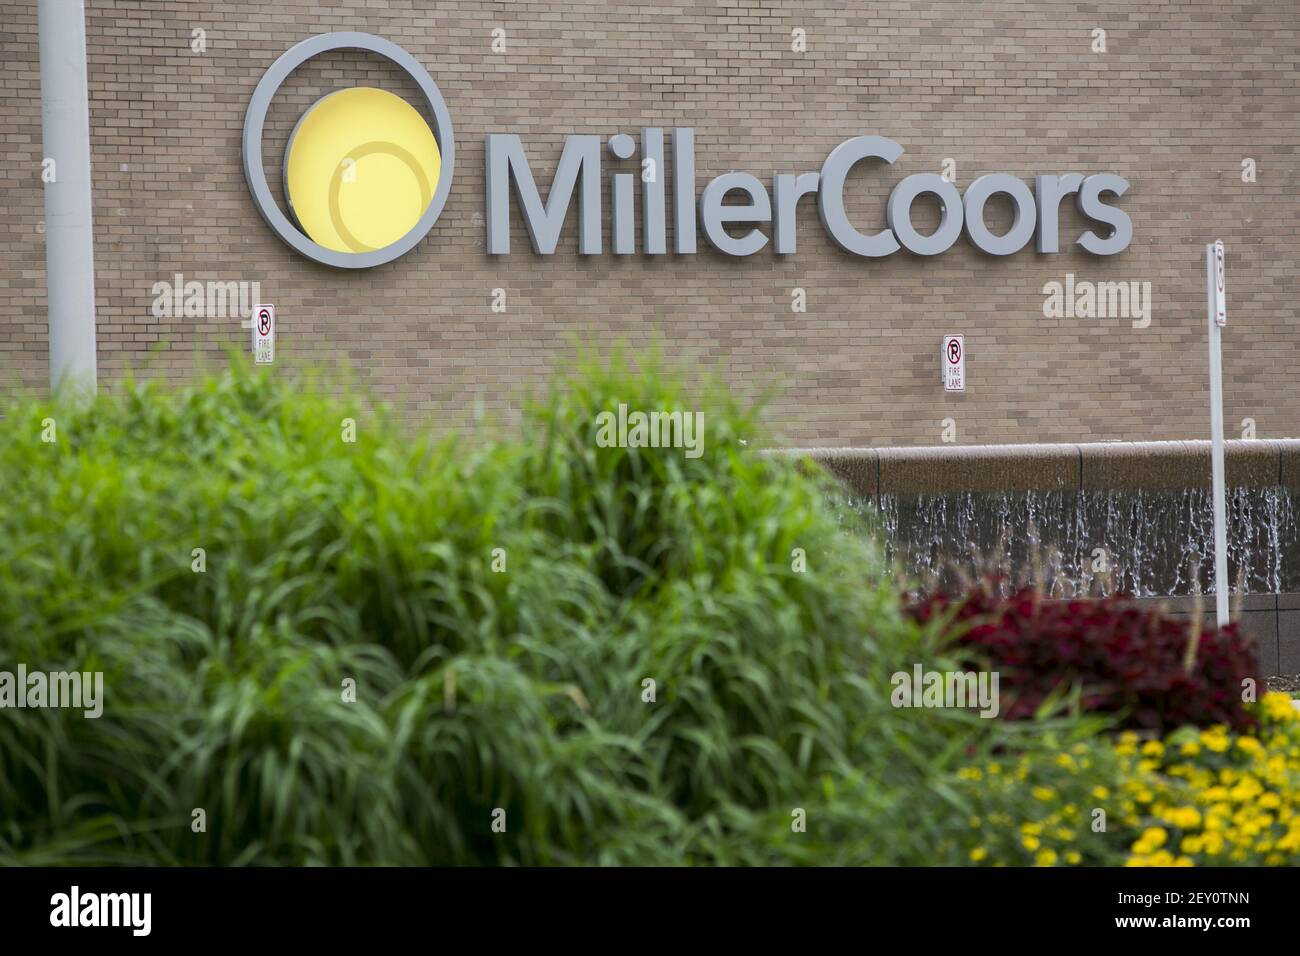 The MillerCoors brewery in Milwaukee, Wisconsin on August 12, 2014. MillerCoors is a joint venture between SABMiller, the parent company of the Miller Brewing Company and the Molson Coors Brewing Company. Photo Credit: Kristoffer Tripplaar/ Sipa USA Stock Photo